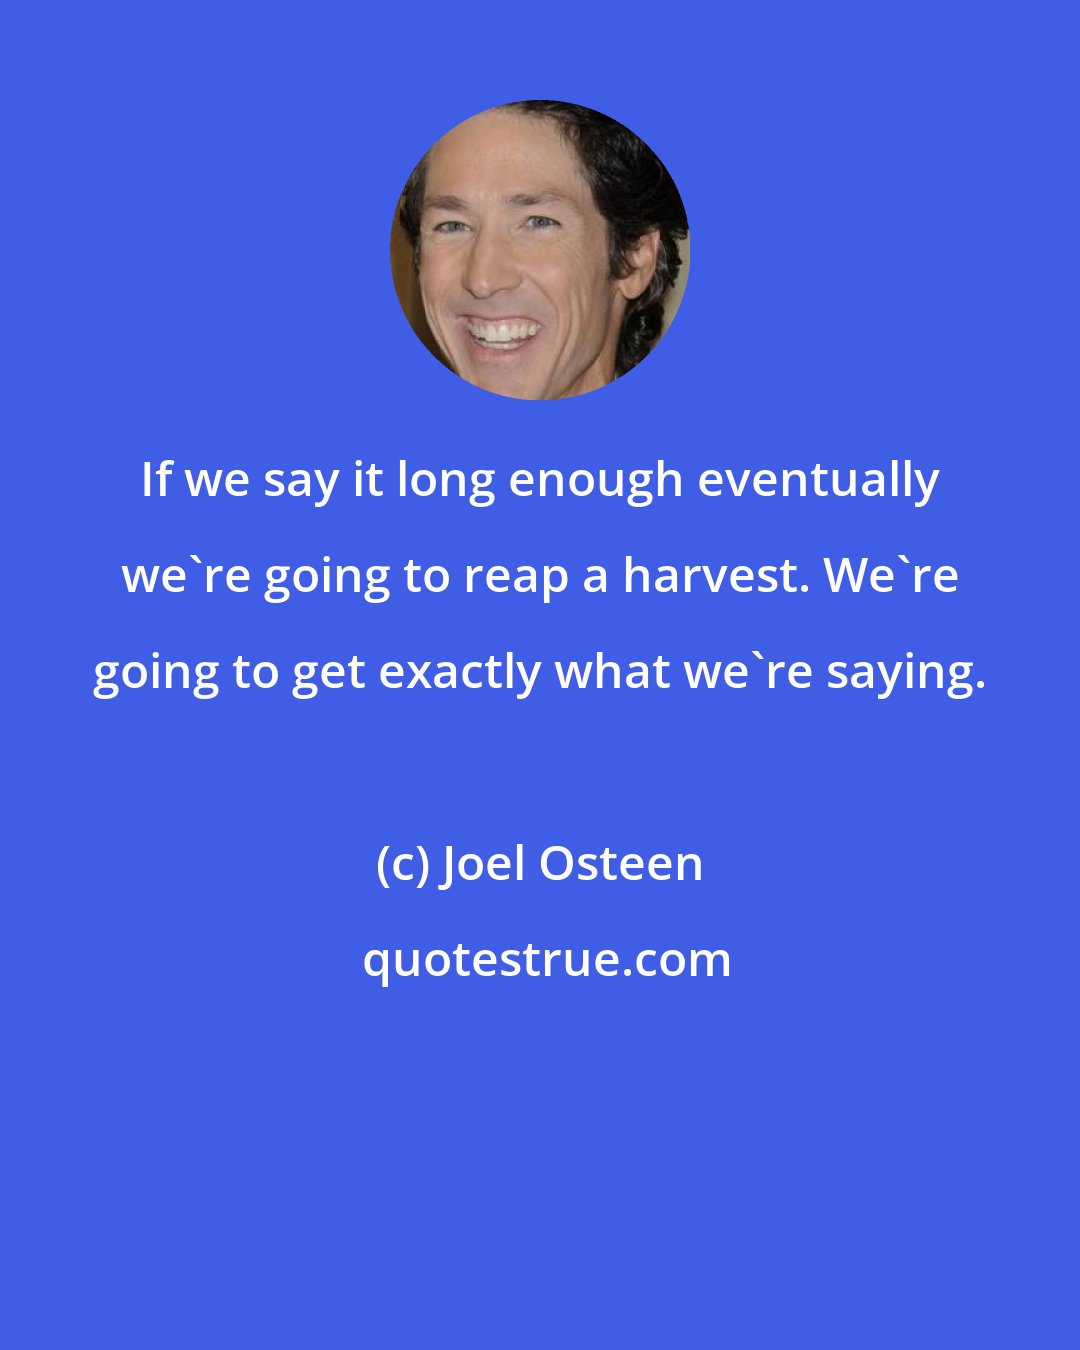 Joel Osteen: If we say it long enough eventually we're going to reap a harvest. We're going to get exactly what we're saying.